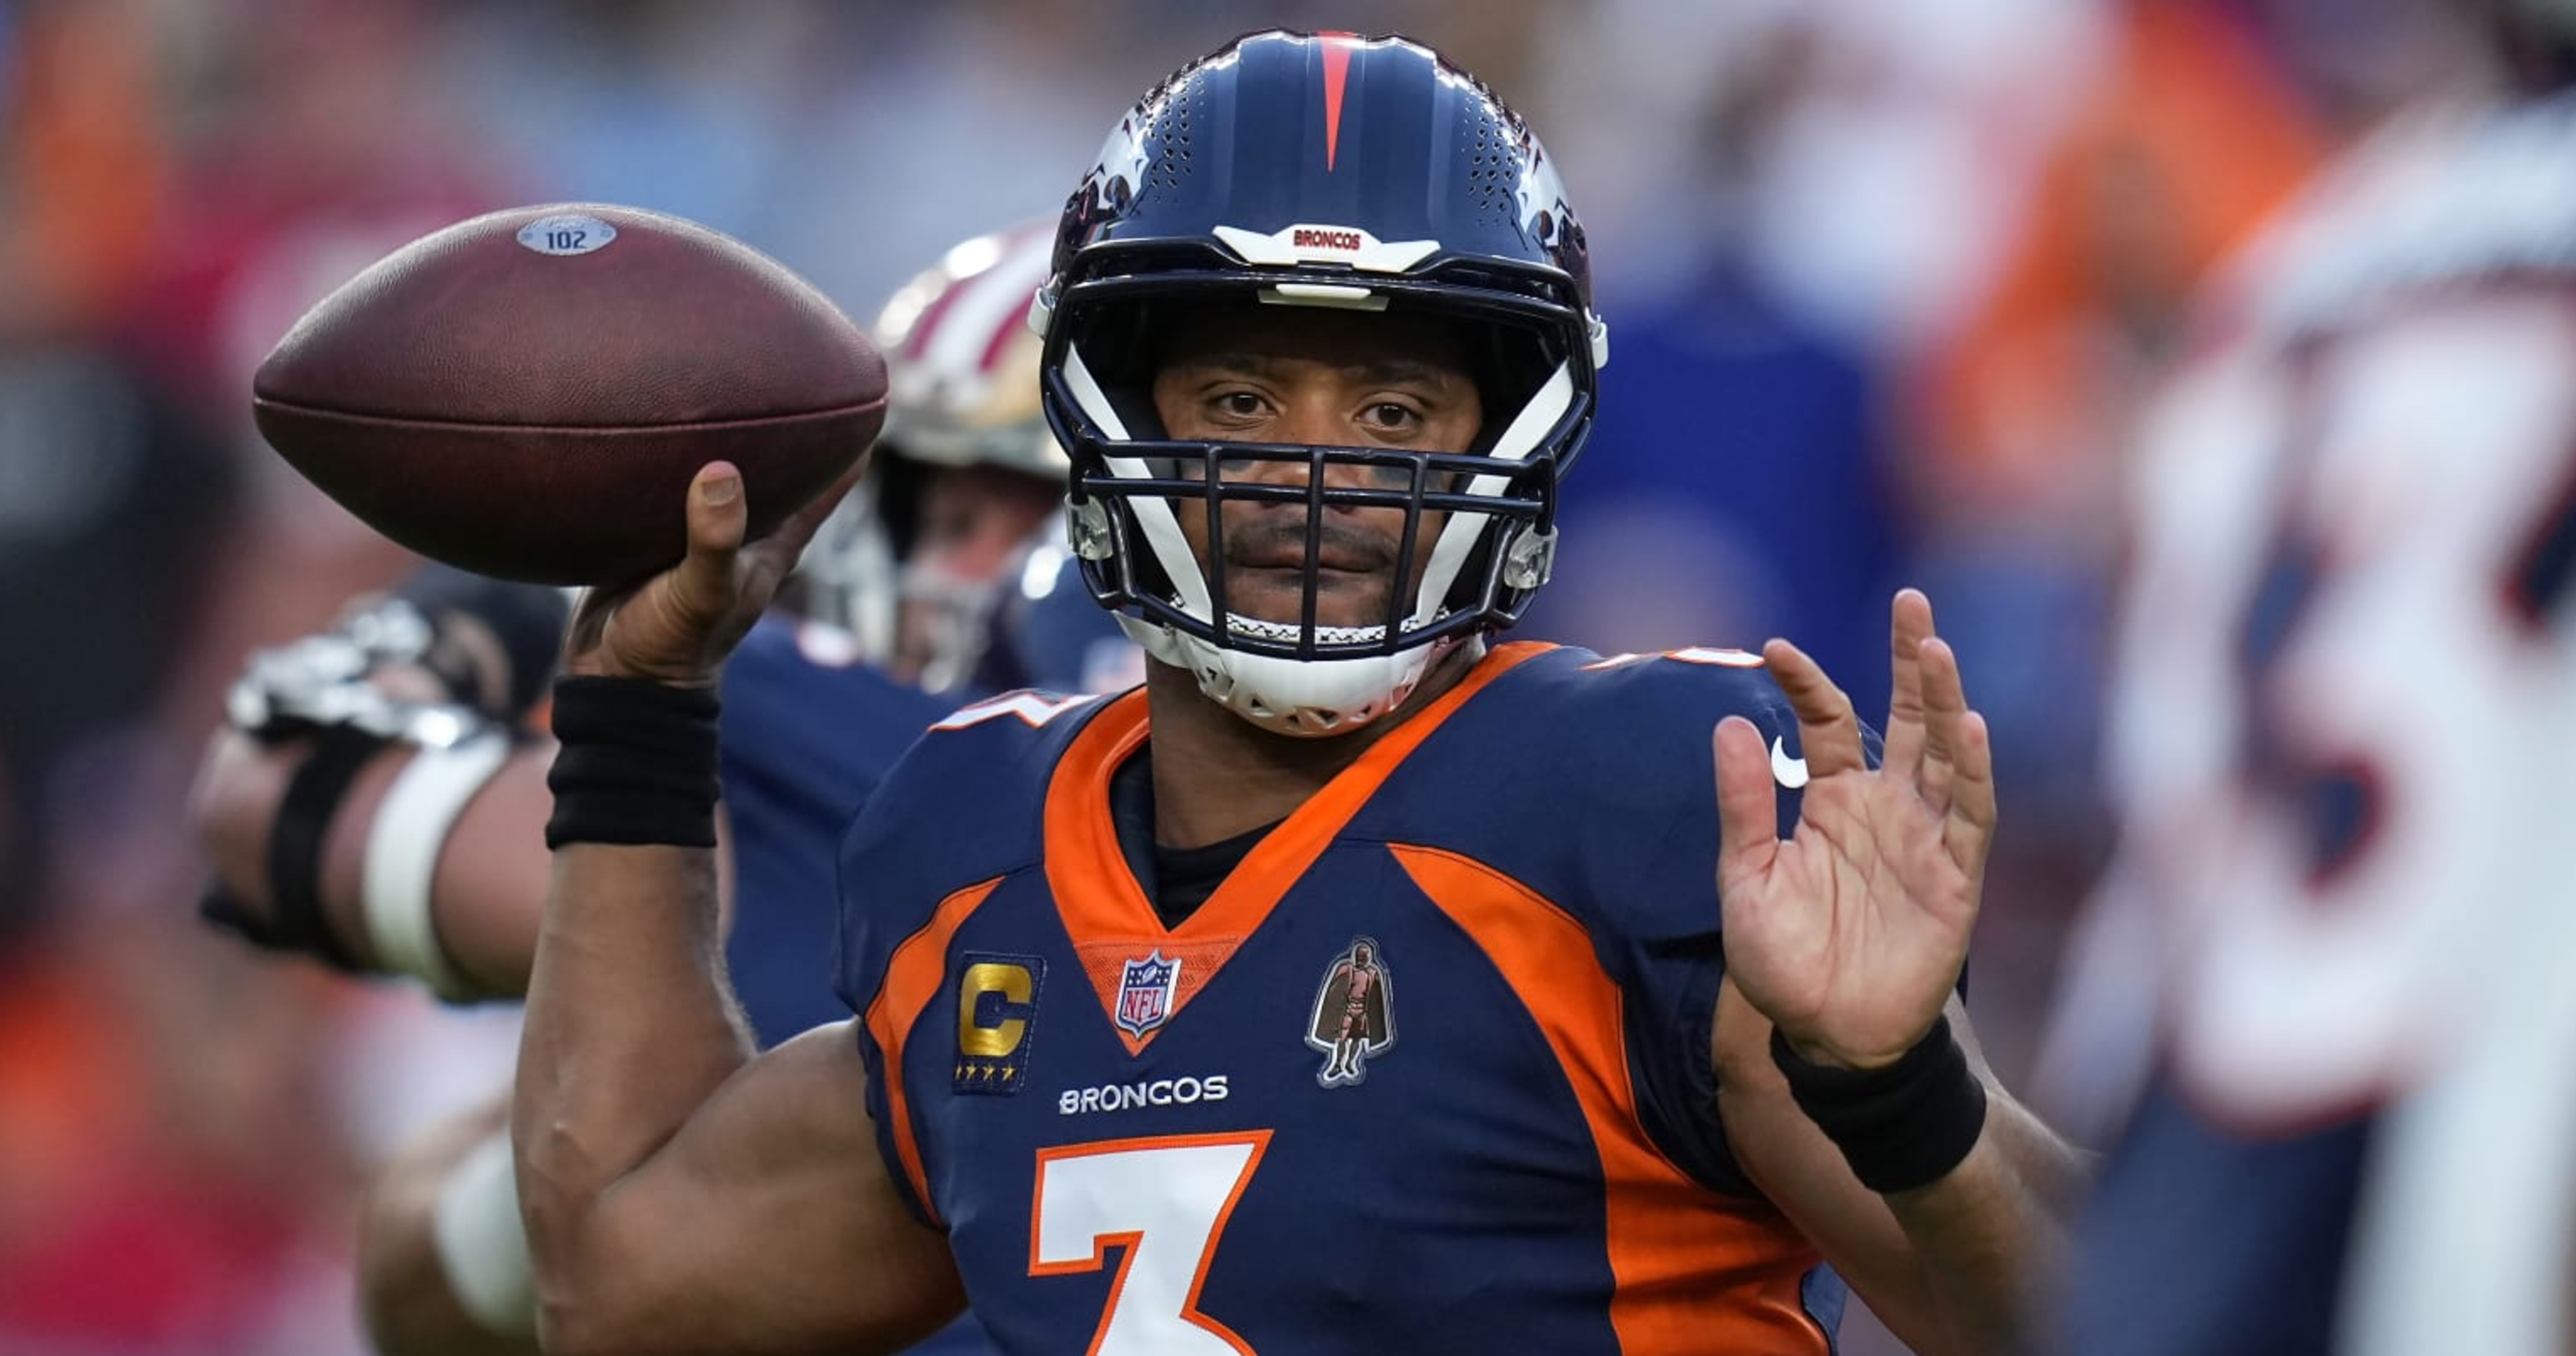 Some of Russell Wilson's Broncos teammates strongly defend him